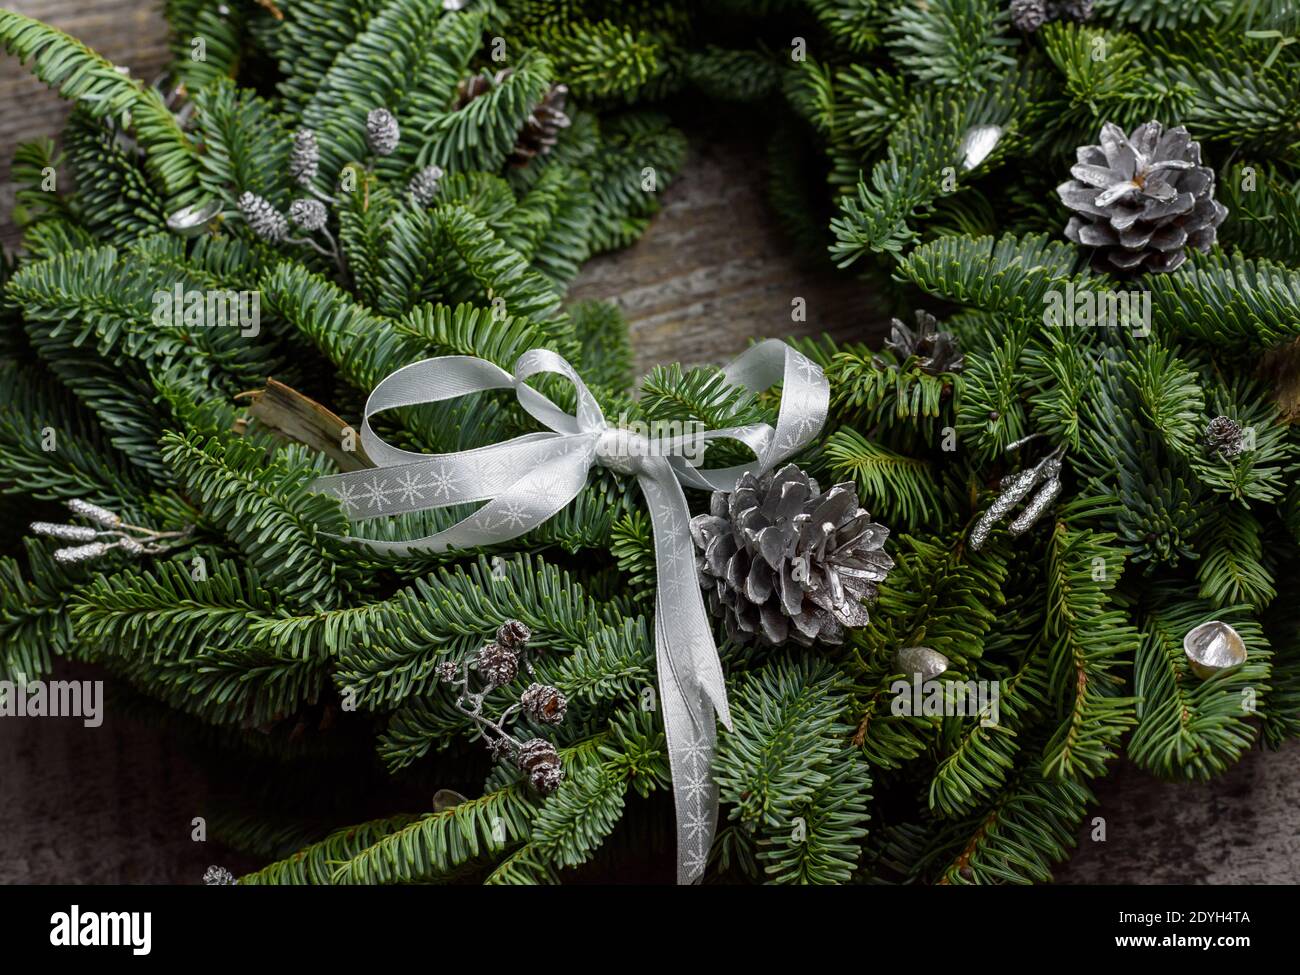 Beauriful green Christmas wreath on a recycled wooden surface, 45 degree angle, rich colors Stock Photo